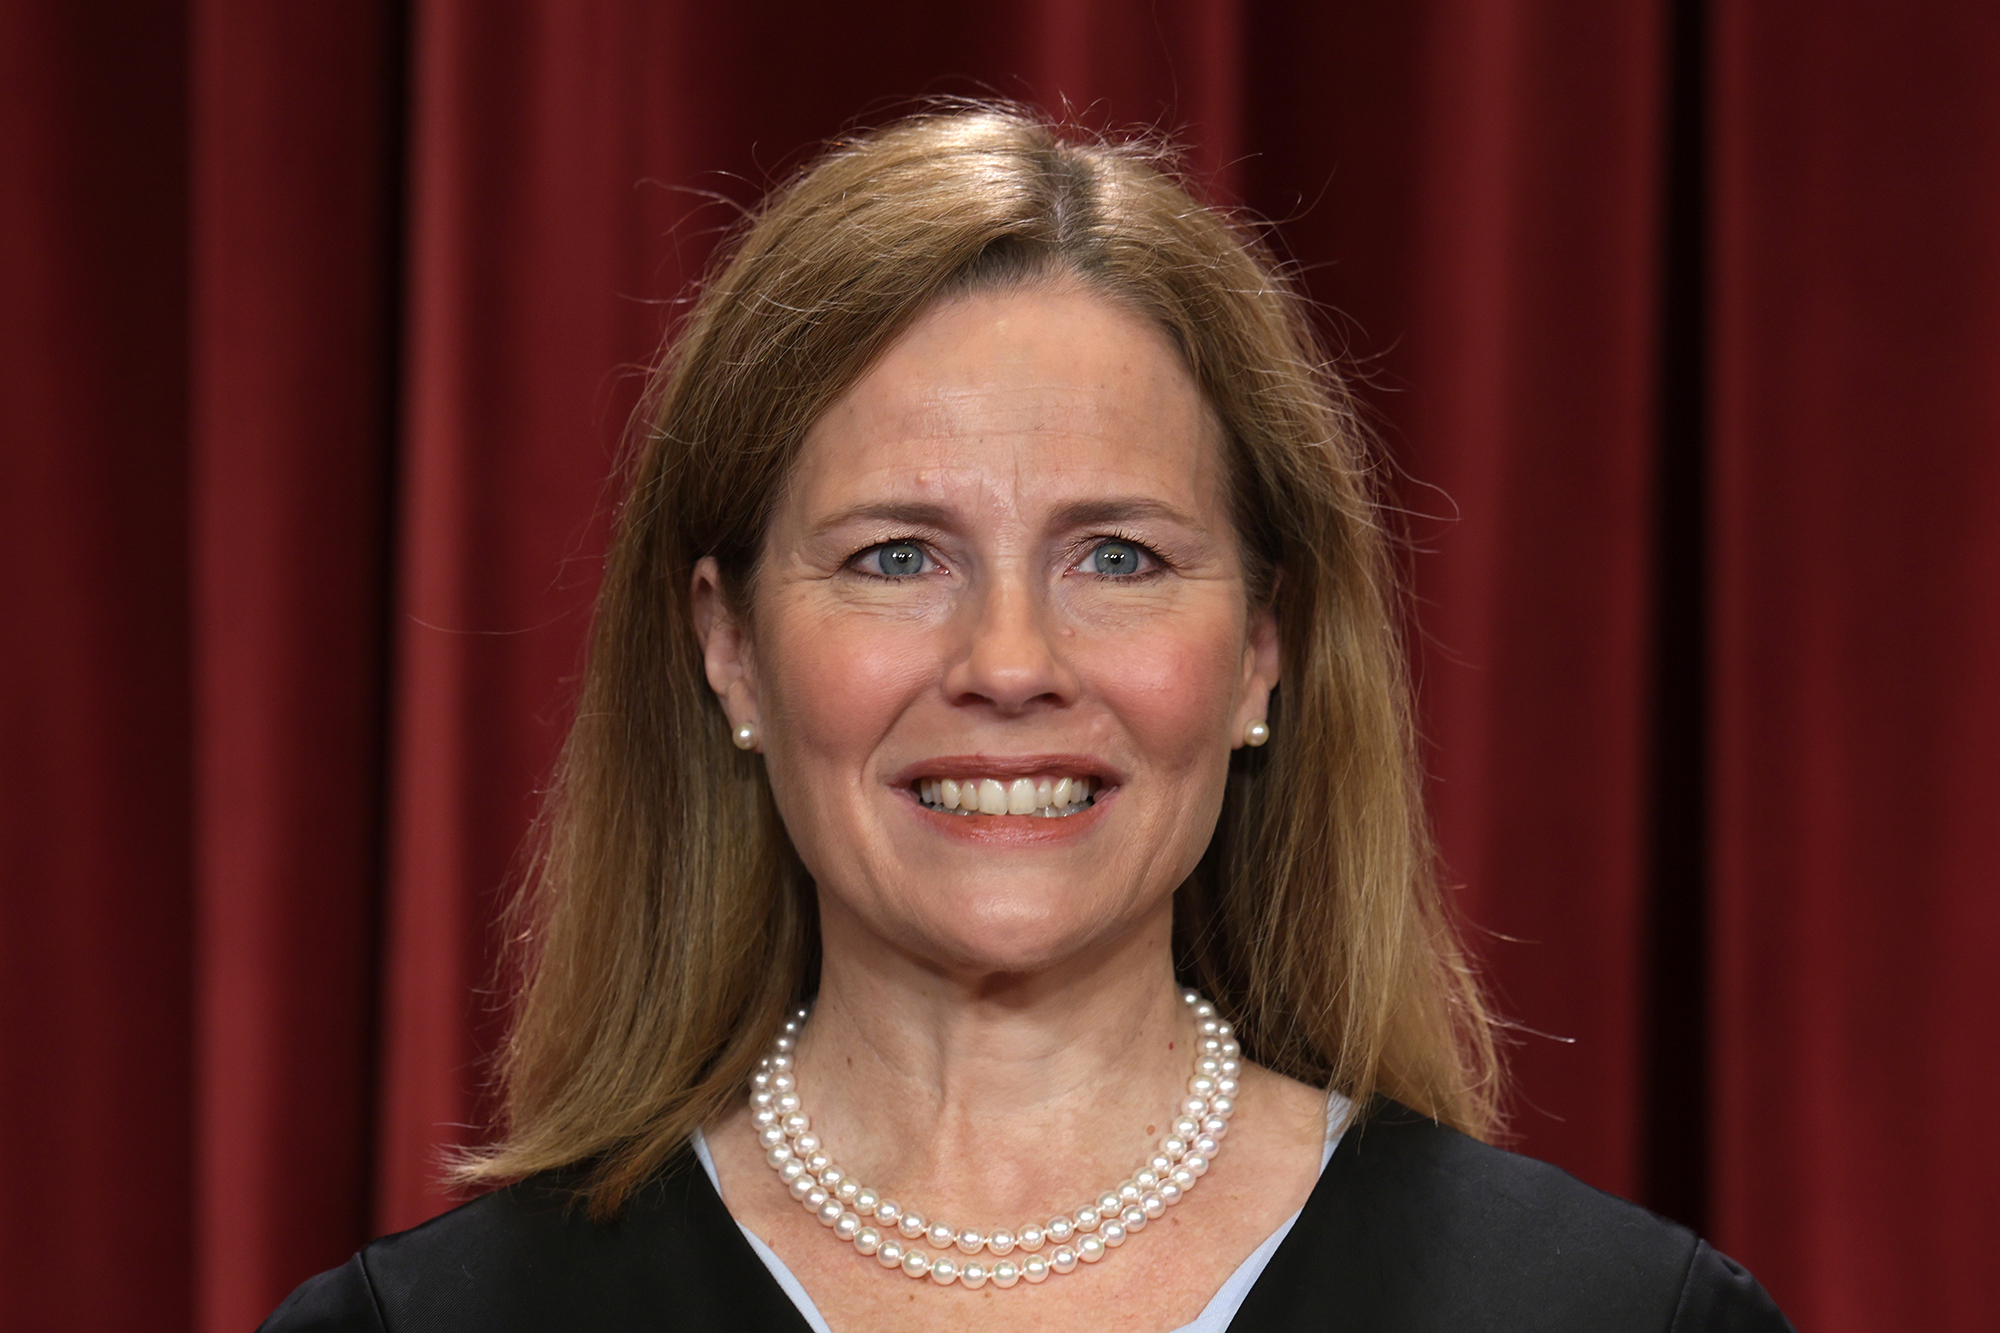 United States Supreme Court Associate Justice Amy Coney Barrett poses for an official portrait at the East Conference Room of the Supreme Court building on October 7, 2022 in Washington, DC.